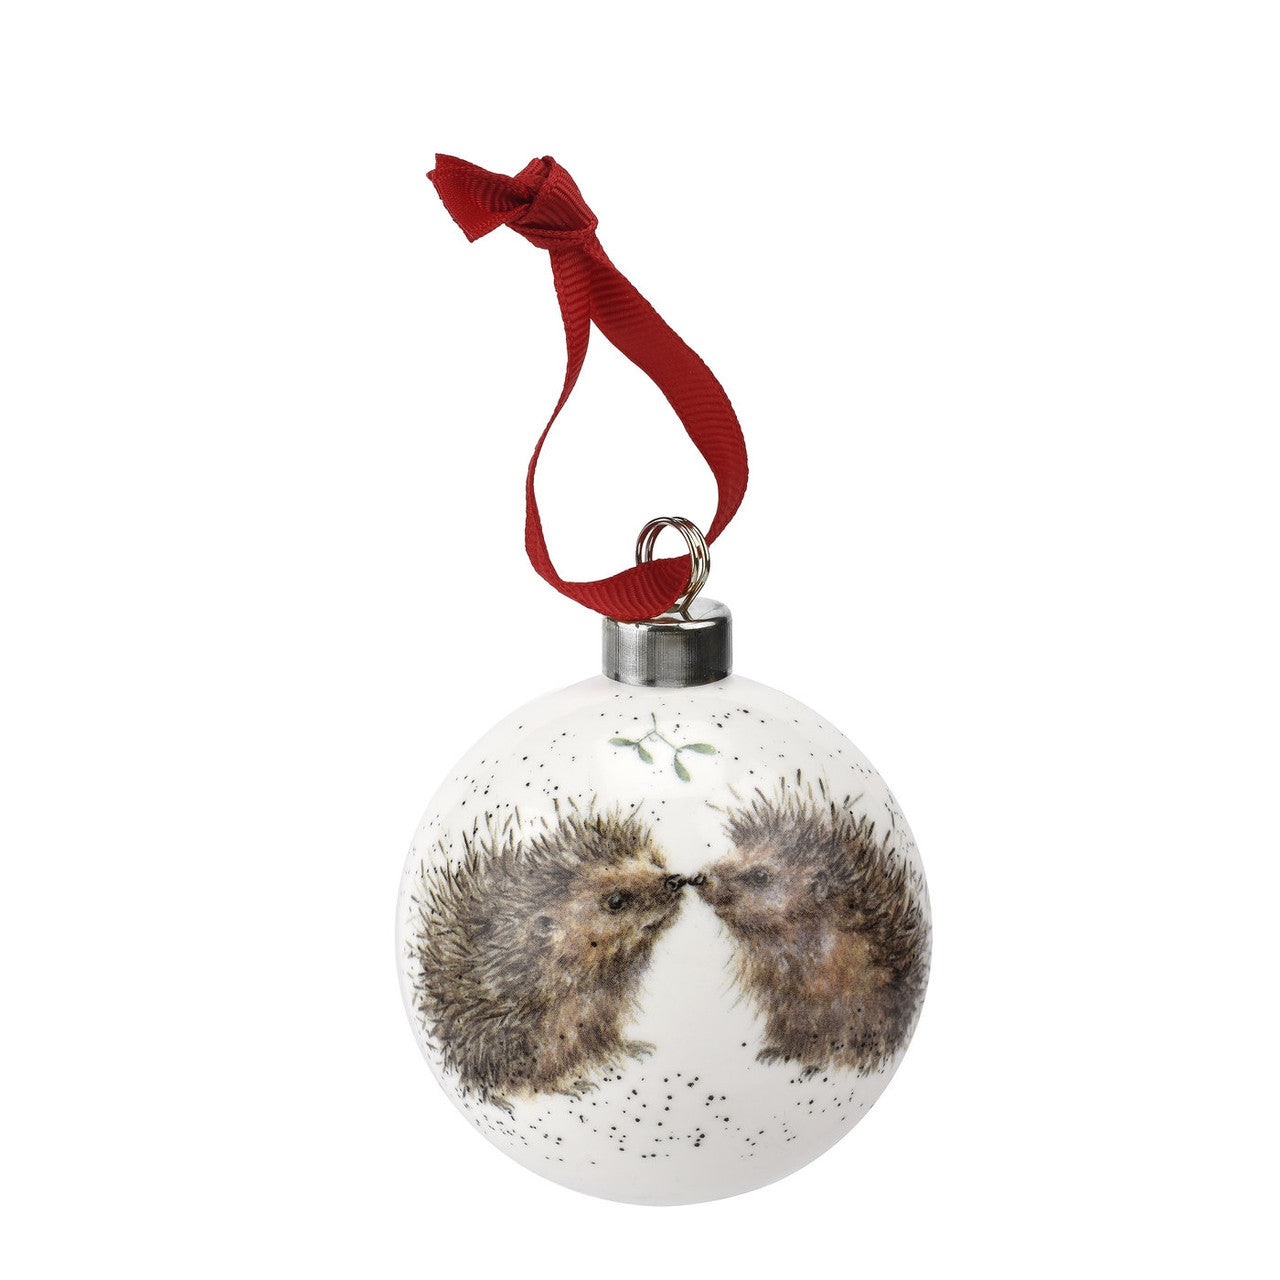 'Hedgehugs' Fine Bone China hedgehog bauble from Wrendale Designs and Portmeirion